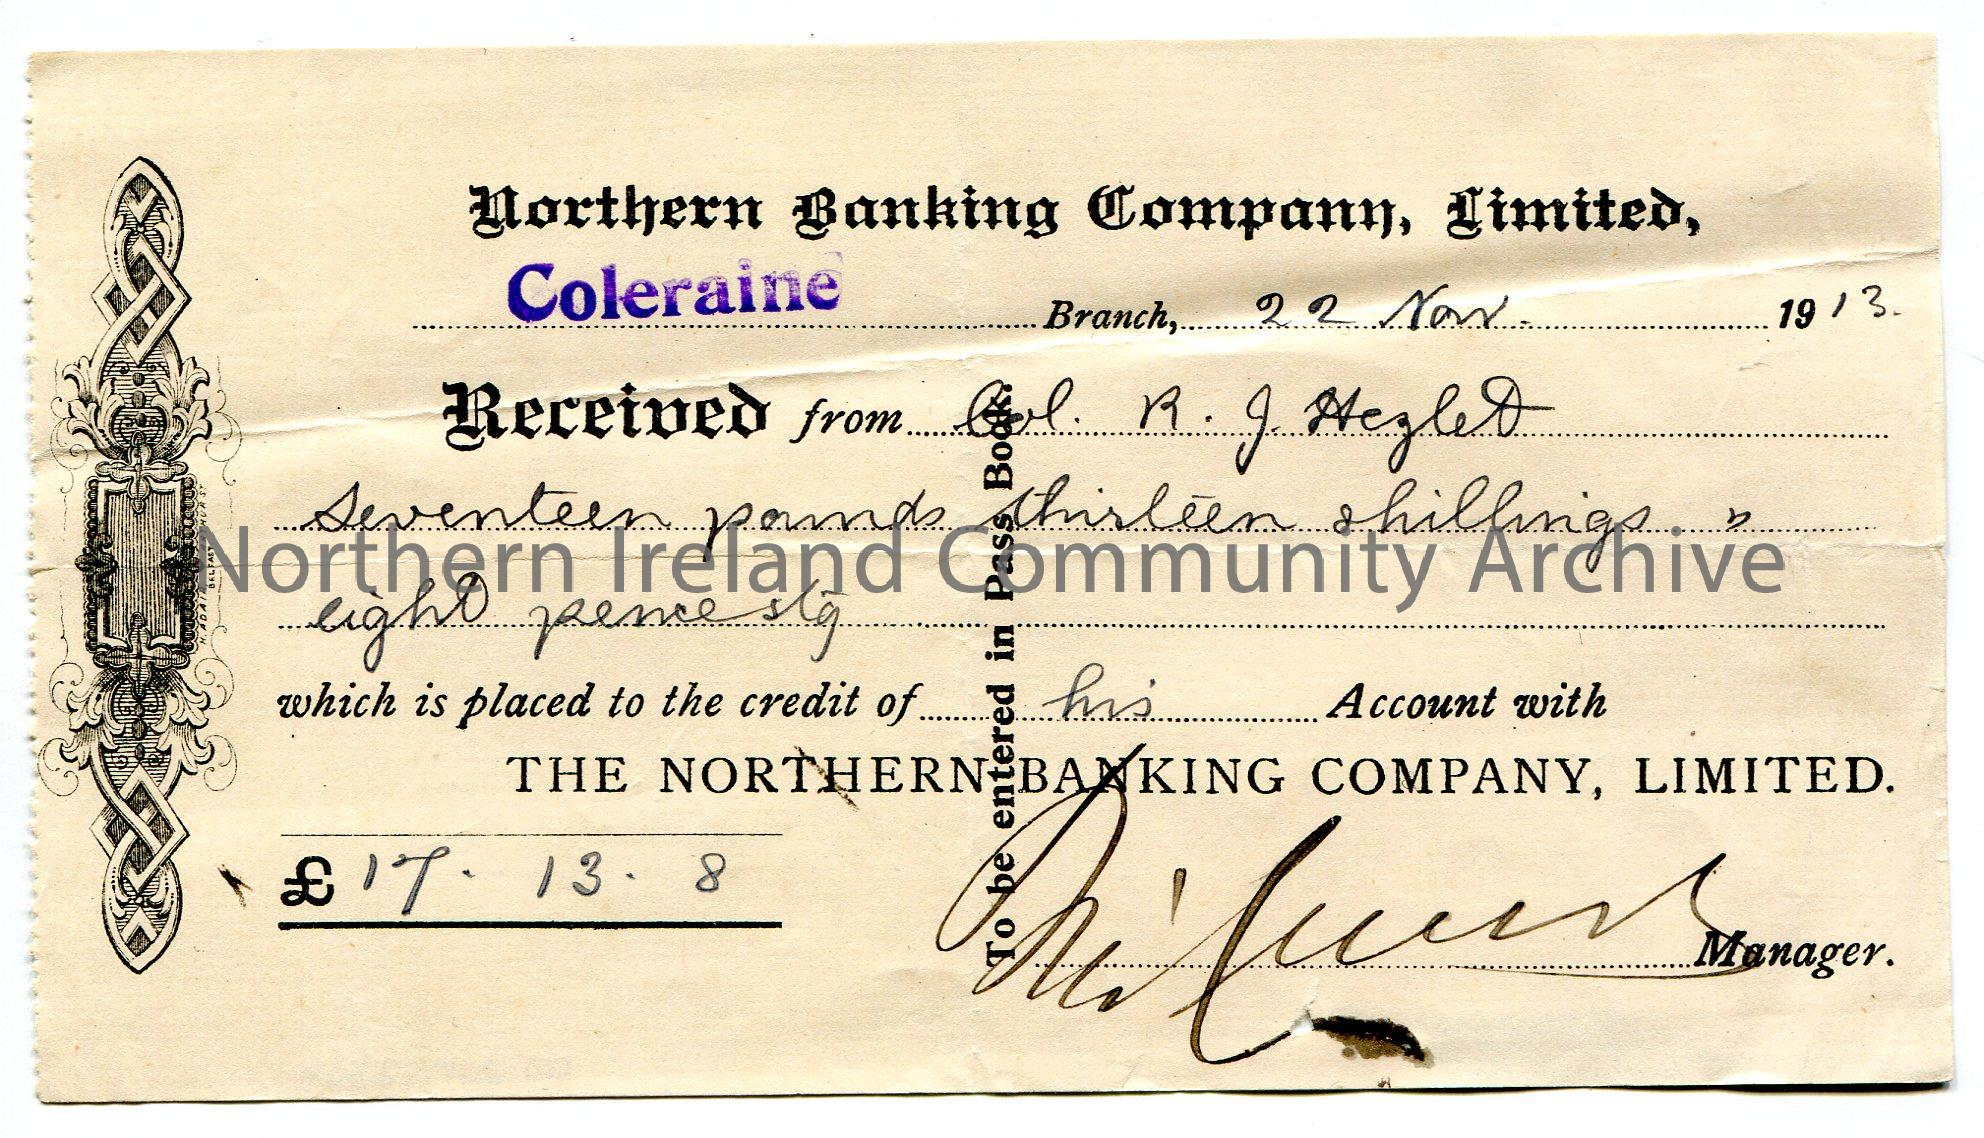 Handwritten receipt from the Northern Banking Company, Limited, Coleraine branch for credit of £17.13.8 into the bank account of Col. R. J. Hezle…